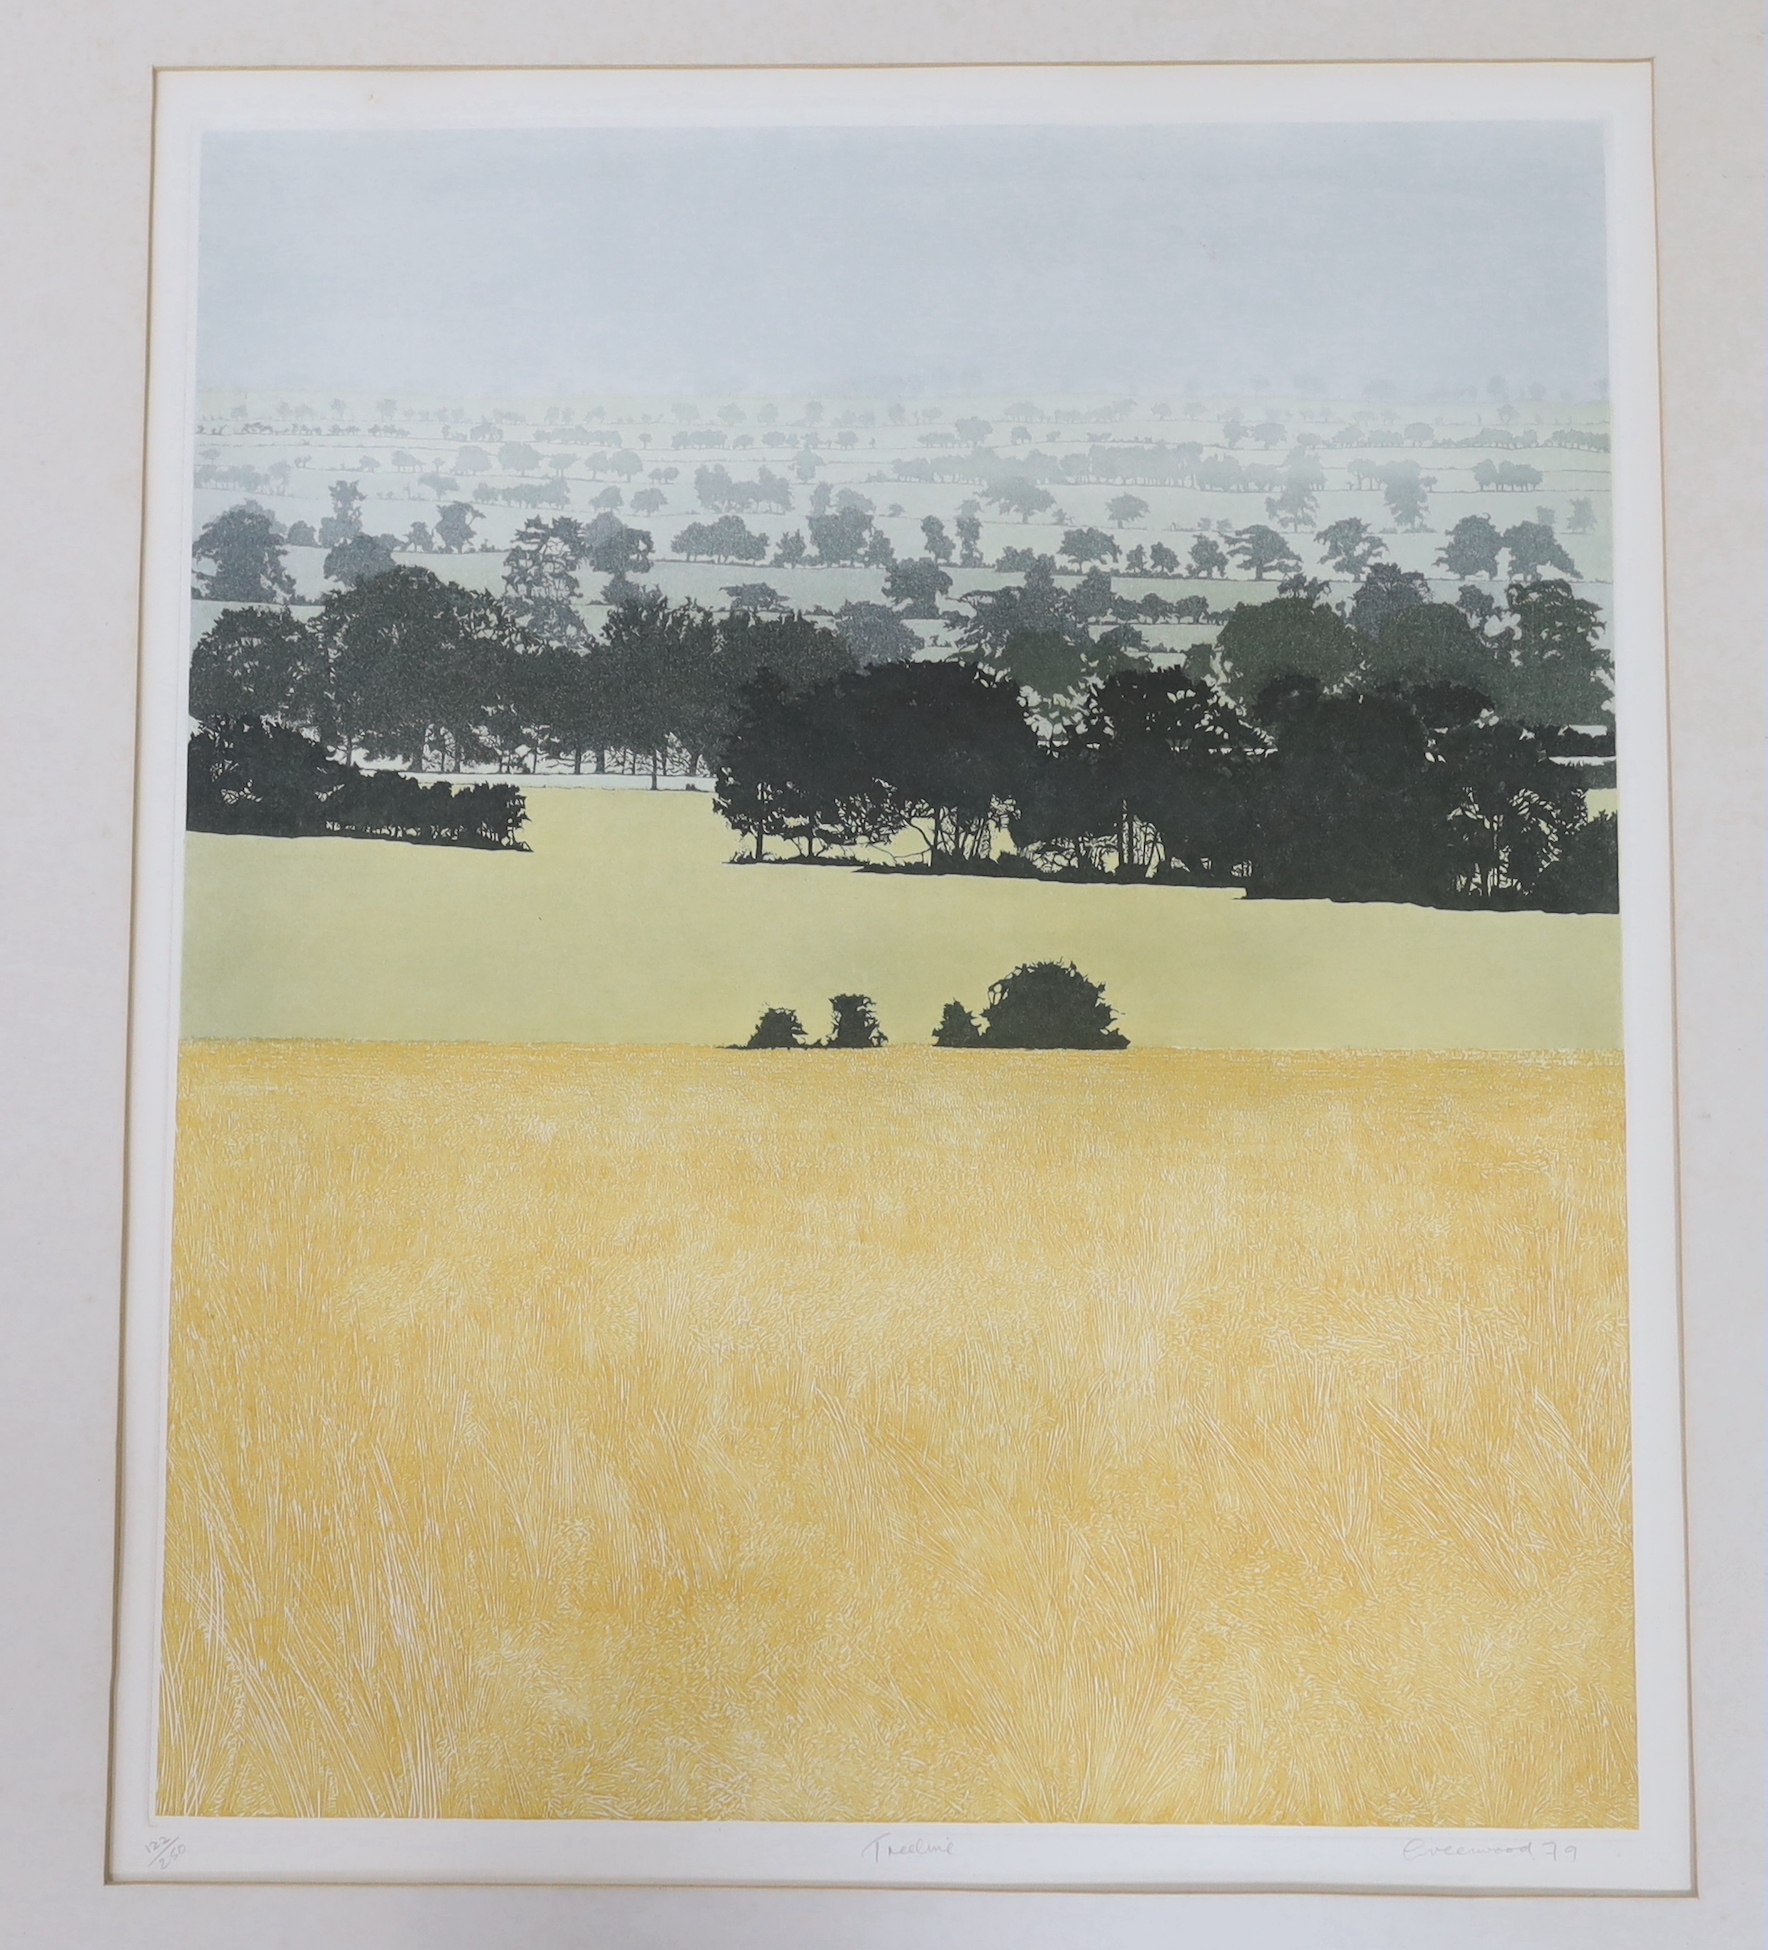 Four pencil signed prints including Hugh Casson (1910-1999) Cathedral, Robert R Greenhalf (b.1950) Two Highland Over and Phil Greenwood (b.1943) Treeline, three framed, largest 55 x 45cm